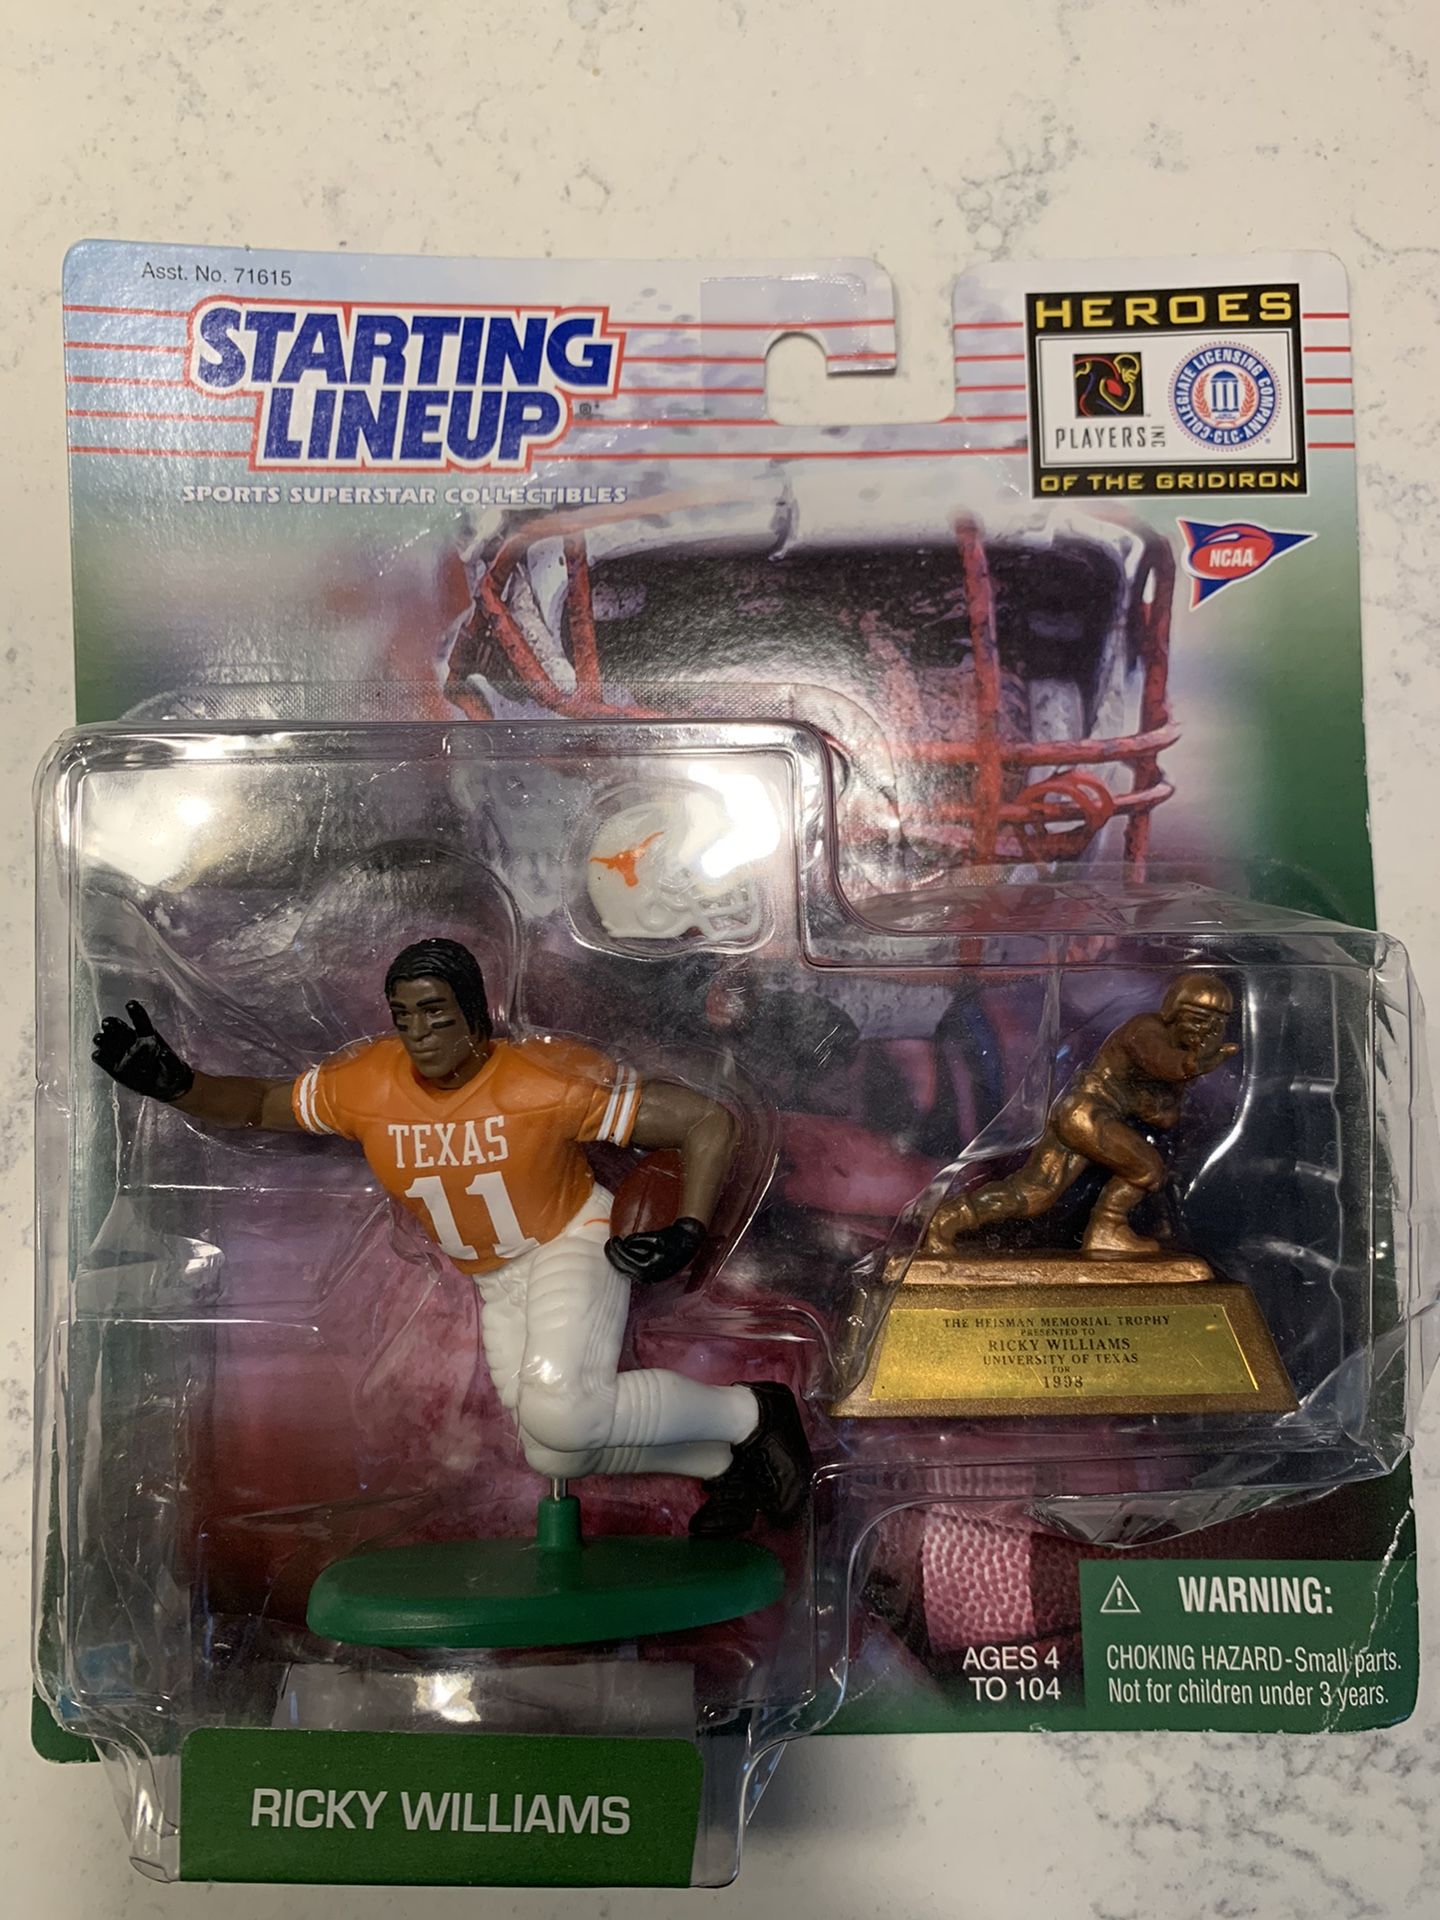 Starting lineup 1999 Ricky Williams Miami dolphins, New Orleans Saints,Texas Longhorns